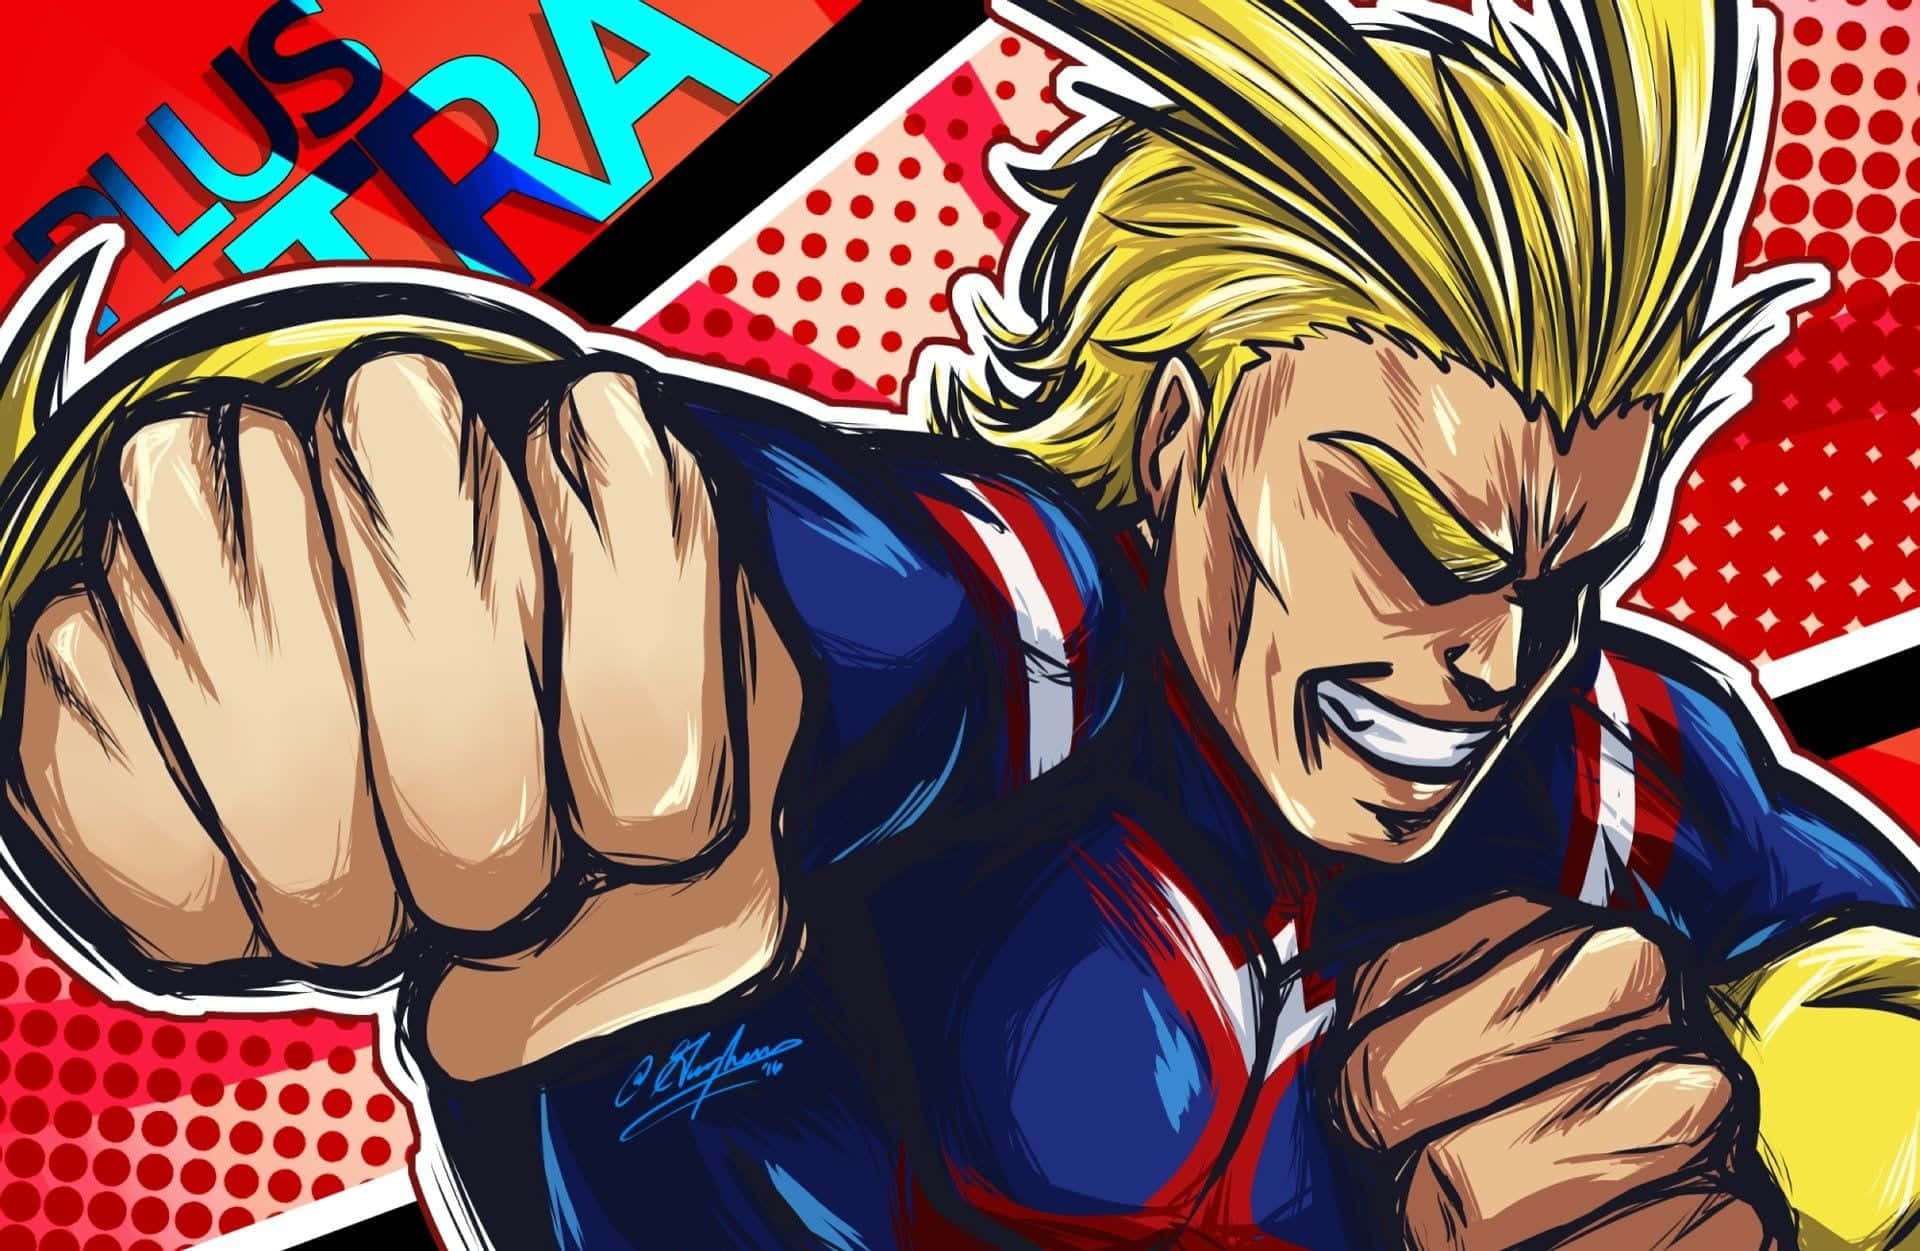 Manga Art Picture Of All Might